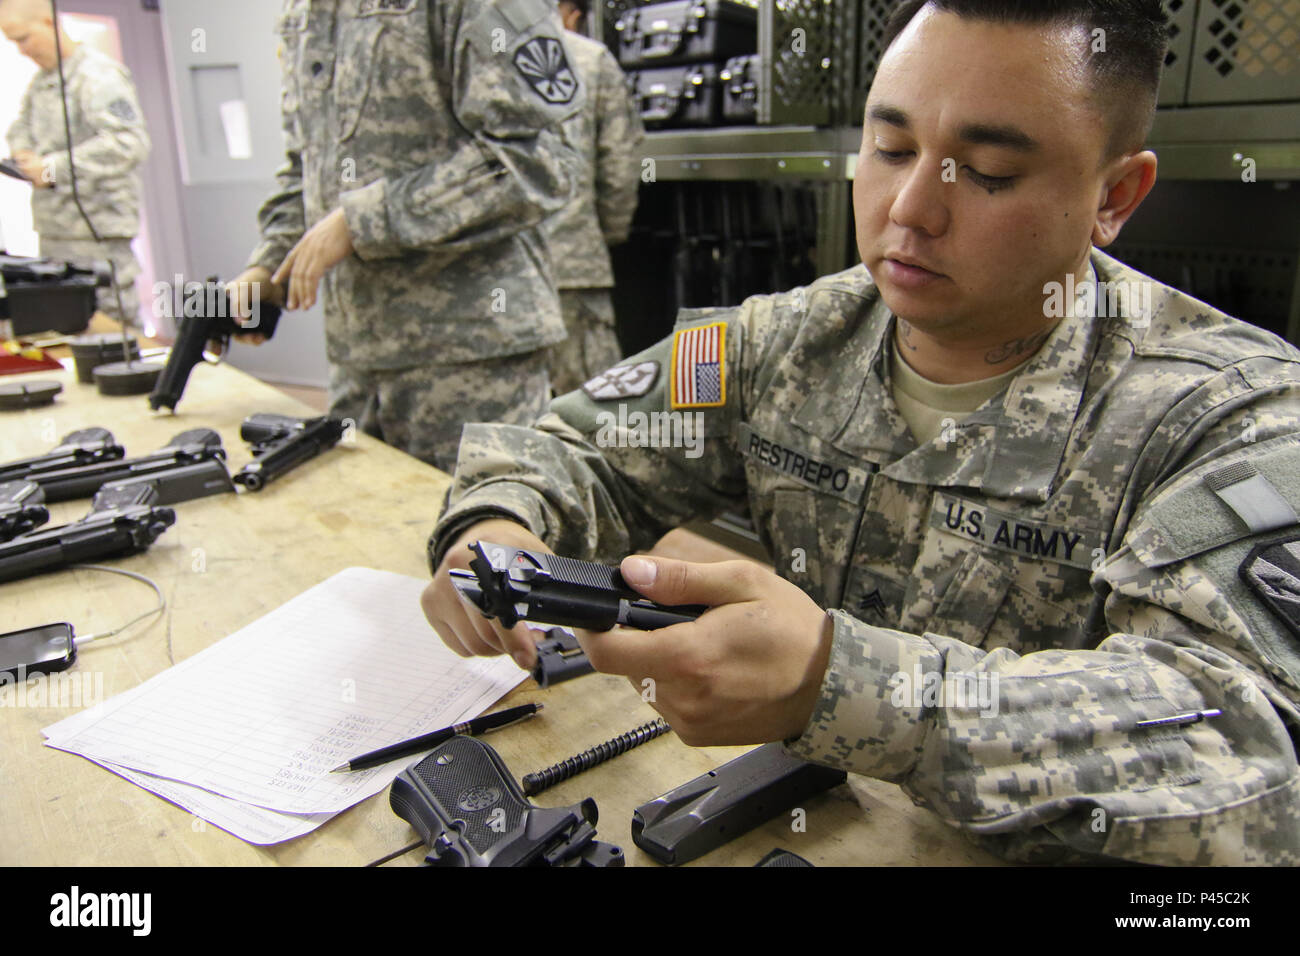 Arizona Army National Guard Sgt. Michael Restrepo, a small-arms repairer with the 3666th Support Maintenance Company, dismantles a M9 pistol during an inspection, June 22, at Fort Greely, Alaska, which is located approximately 100 miles southeast of Fairbanks, Alaska. Restrepo was part mobile repair team from Arizona that inspected nearly 600 weapons during their annual training for the Alaska National Guard’s 49th Missile Defense Battalion. (Arizona Army National Guard photo by Staff Sgt. Brian A. Barbour) Stock Photo